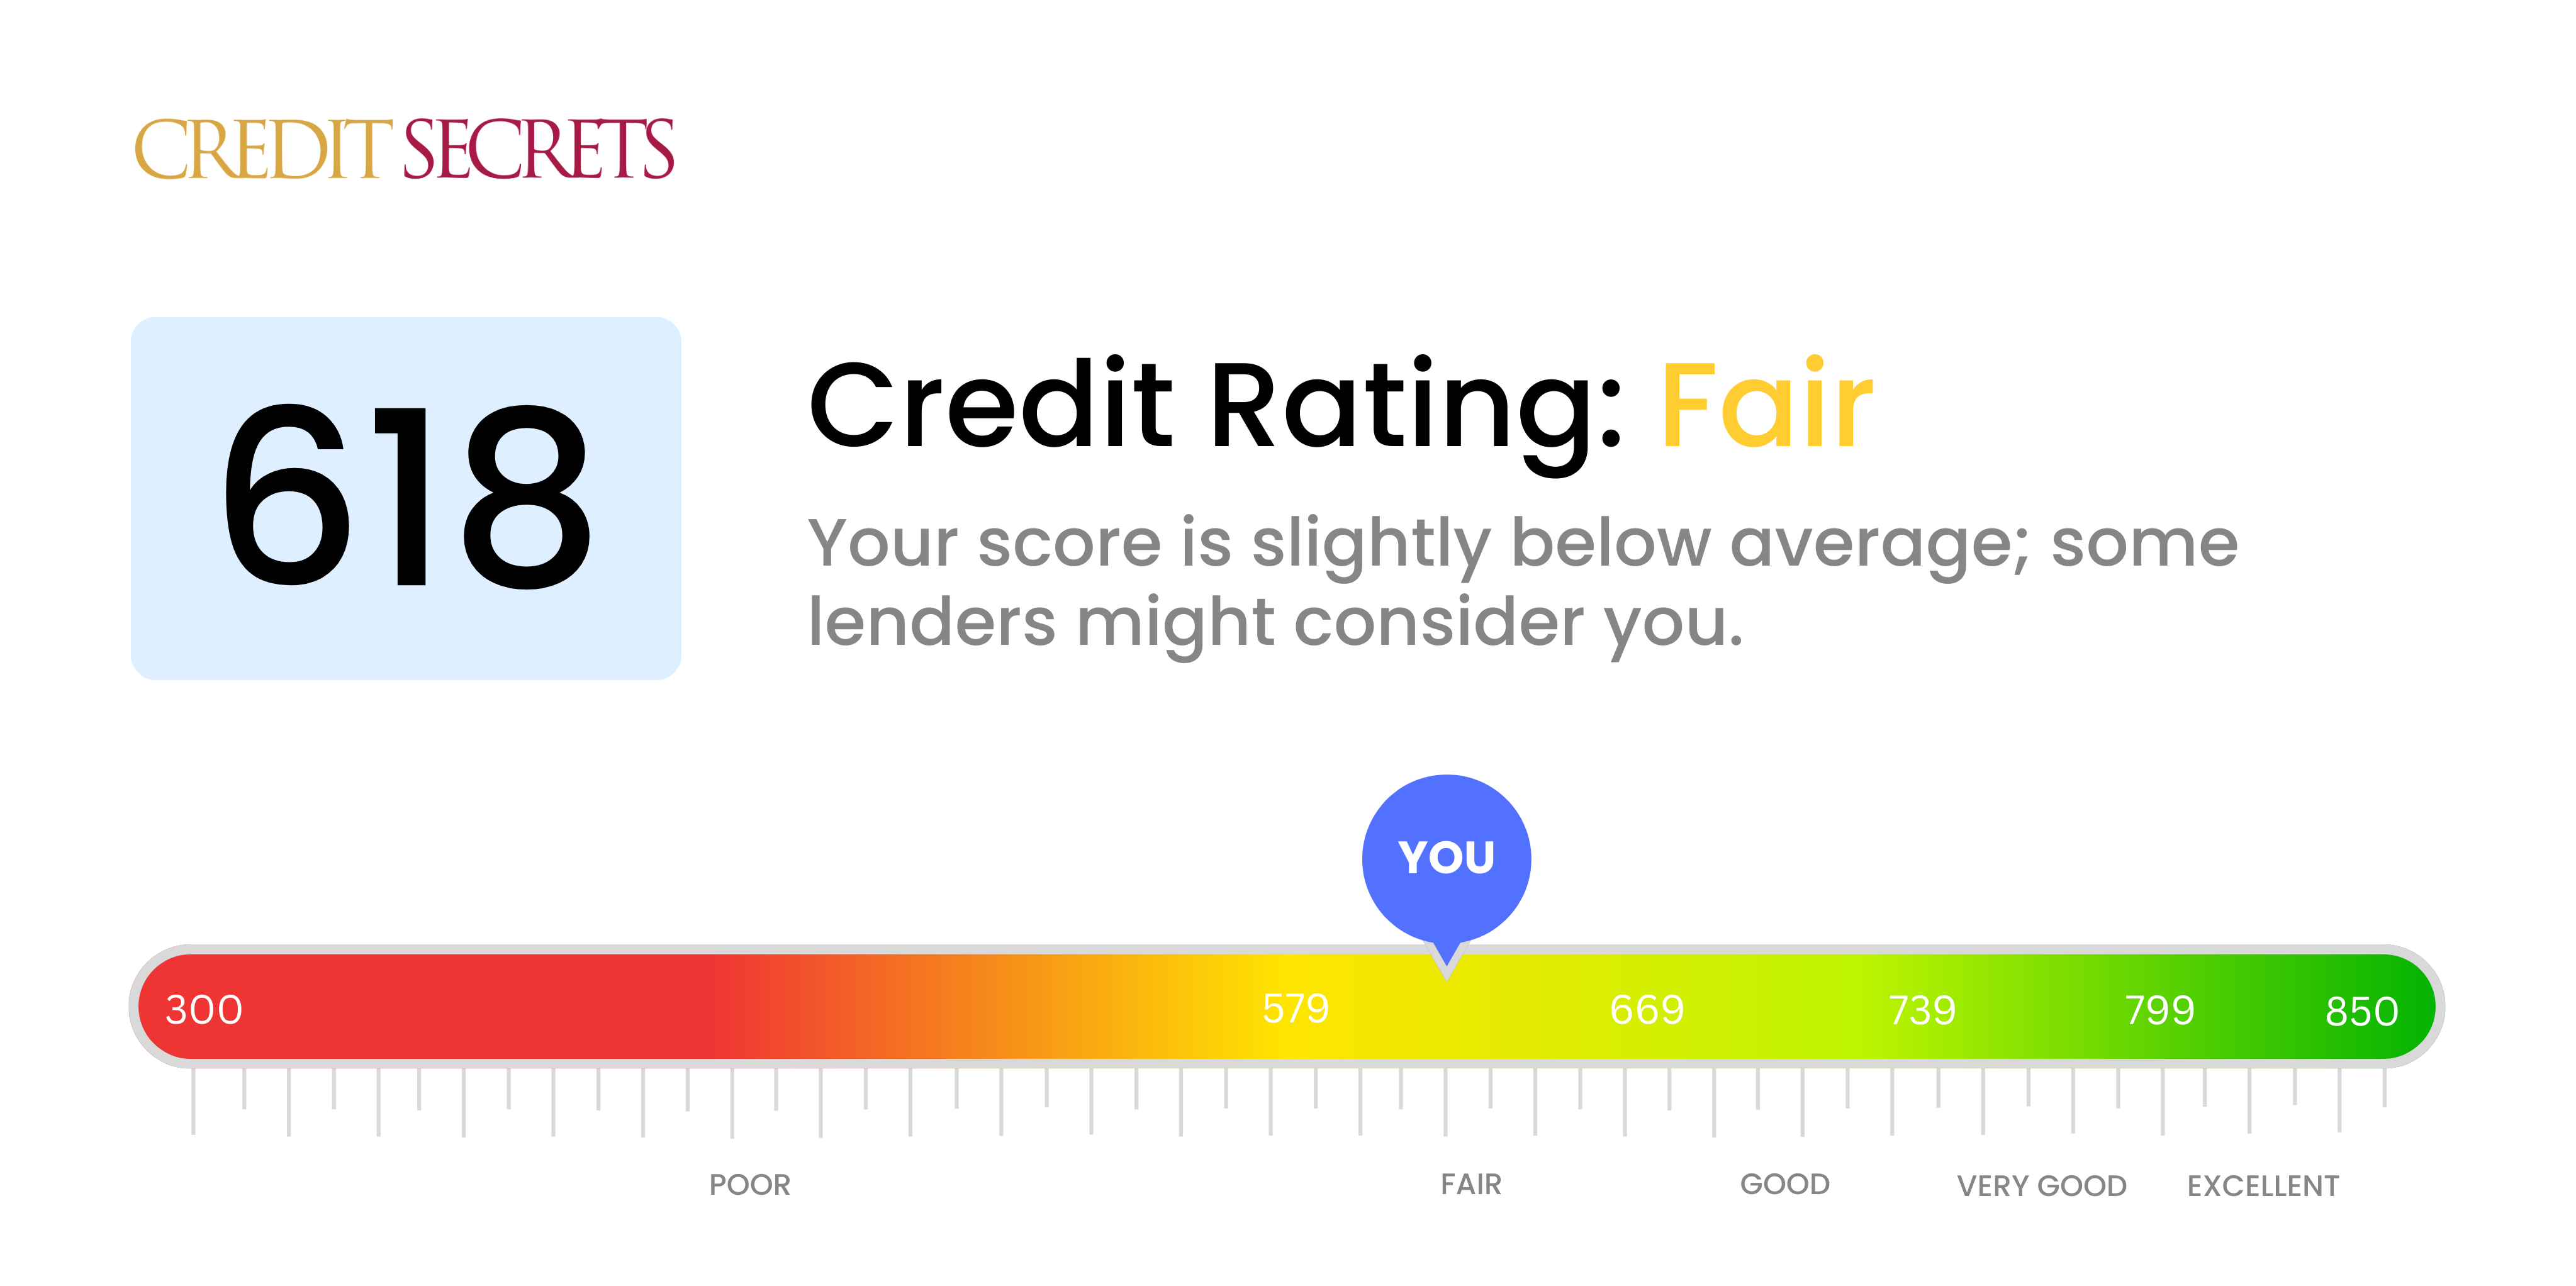 Is 618 a good credit score?